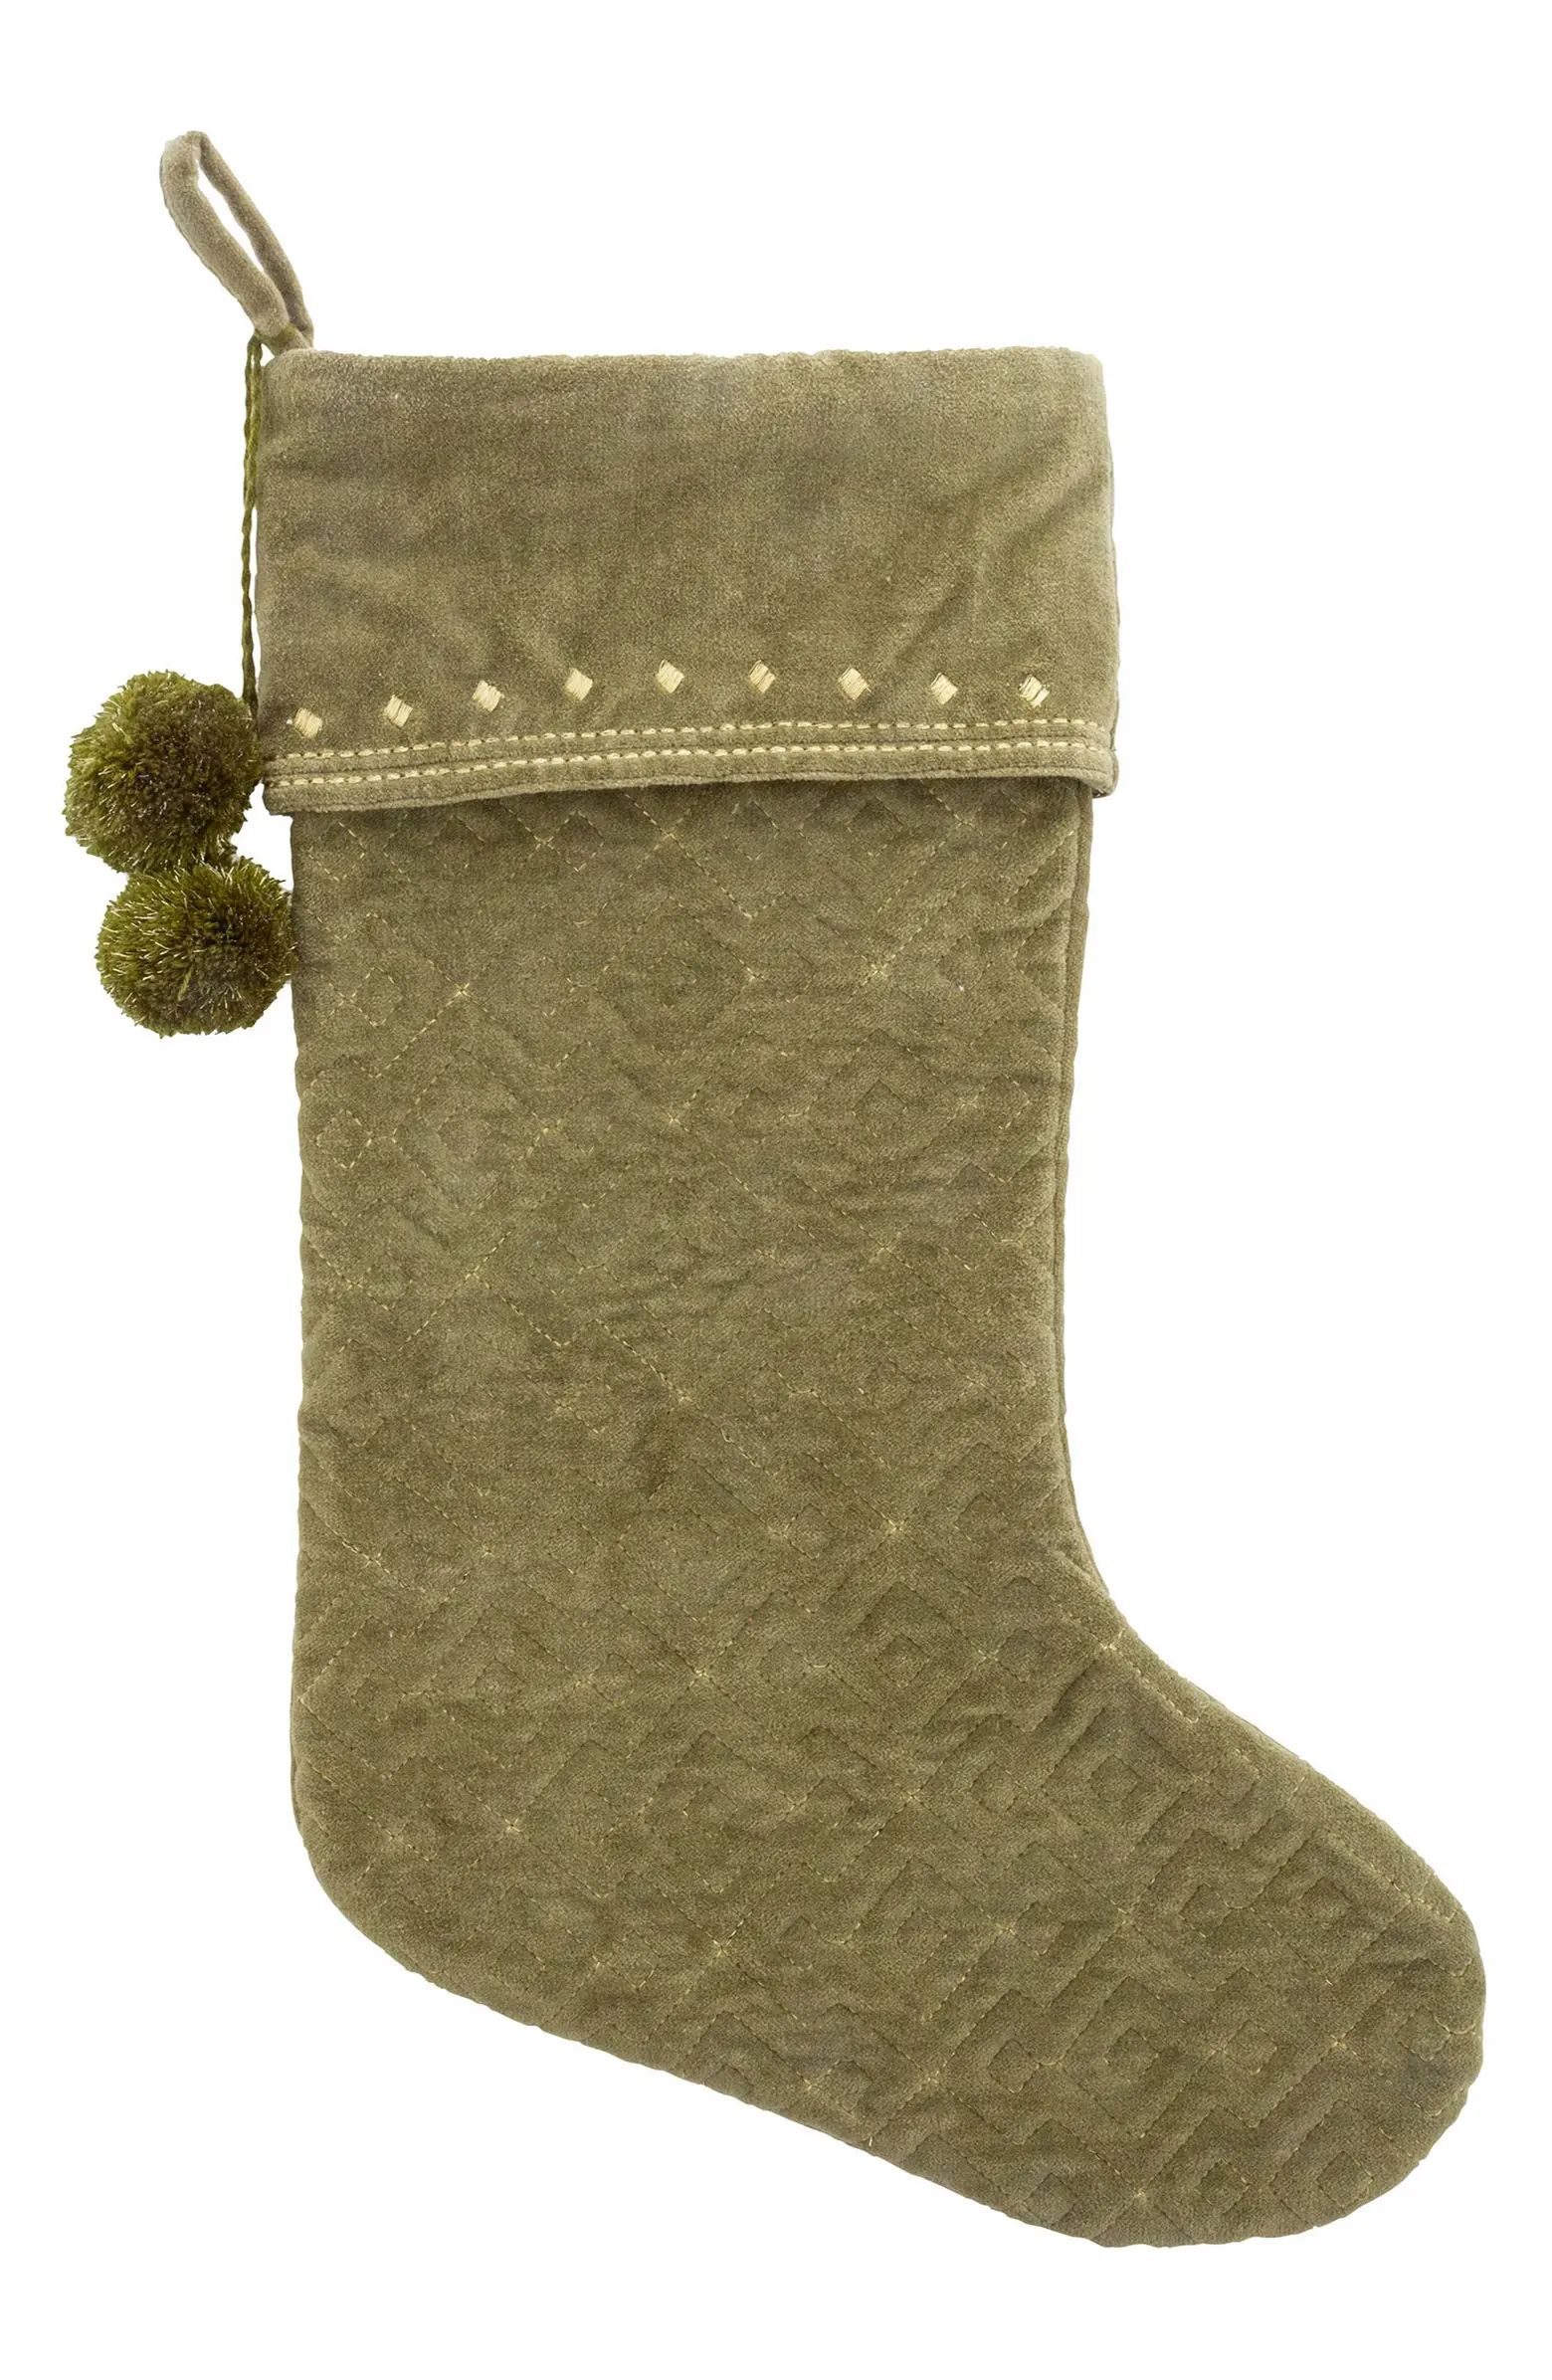 Pompom Quilted Holiday Stocking | Nordstrom Rack